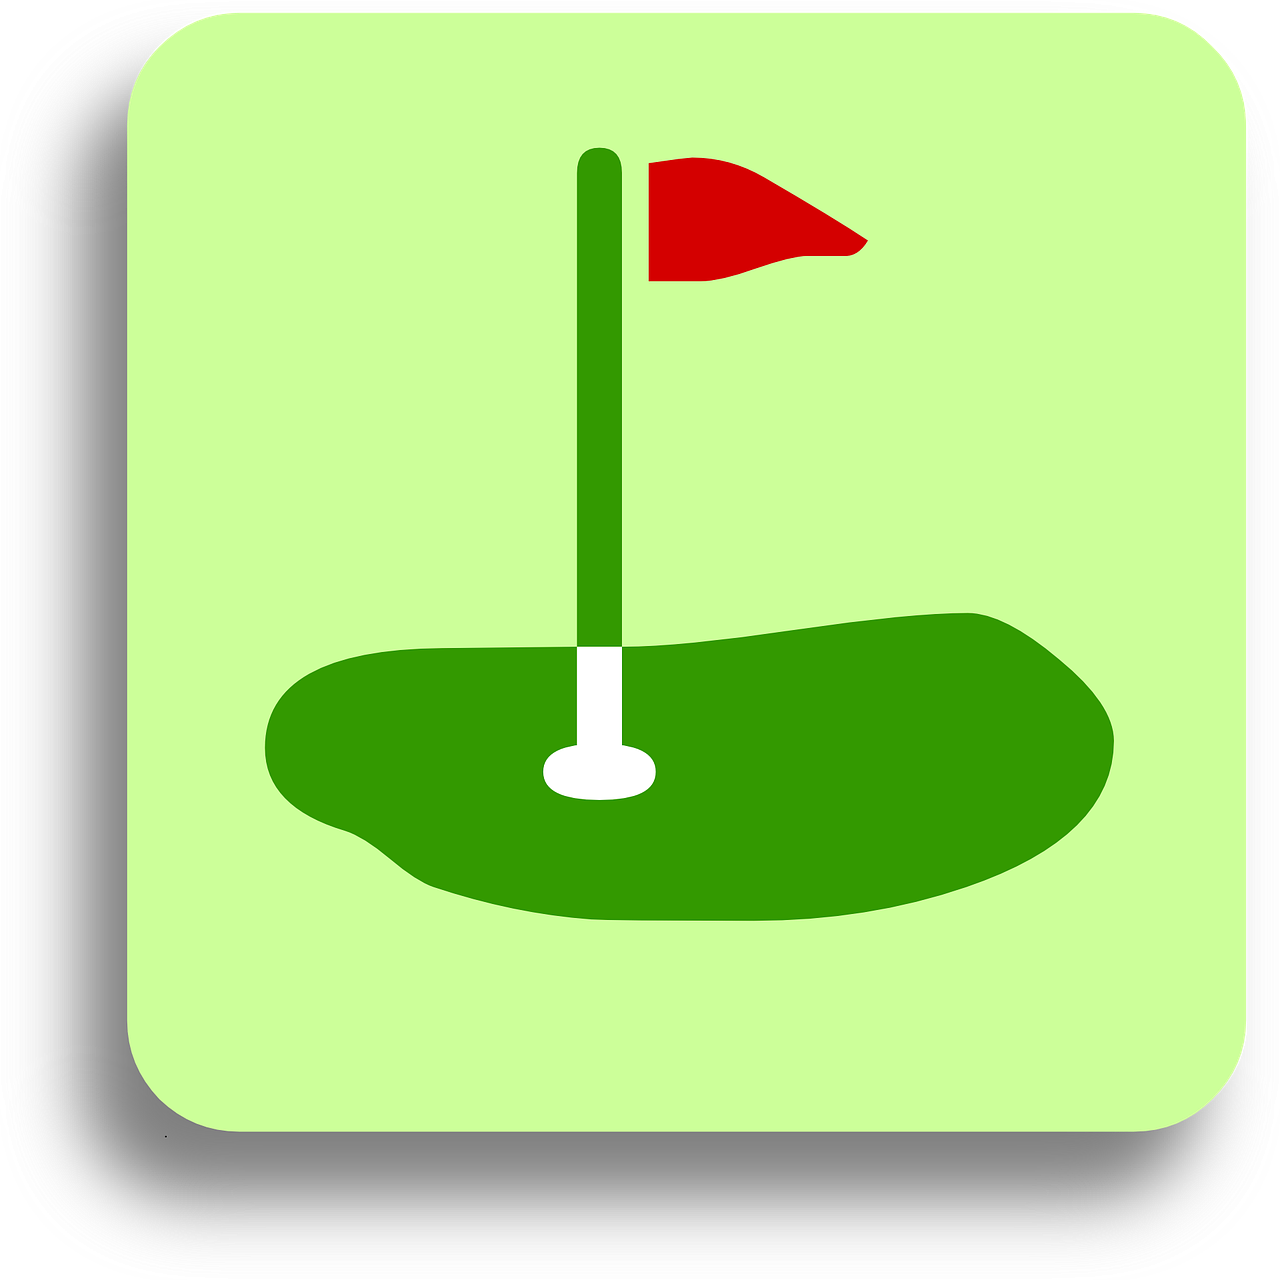 flag,golf,green,hole,target,putt,golfing,course,icon,symbol,free vector graphics,free pictures, free photos, free images, royalty free, free illustrations, public domain